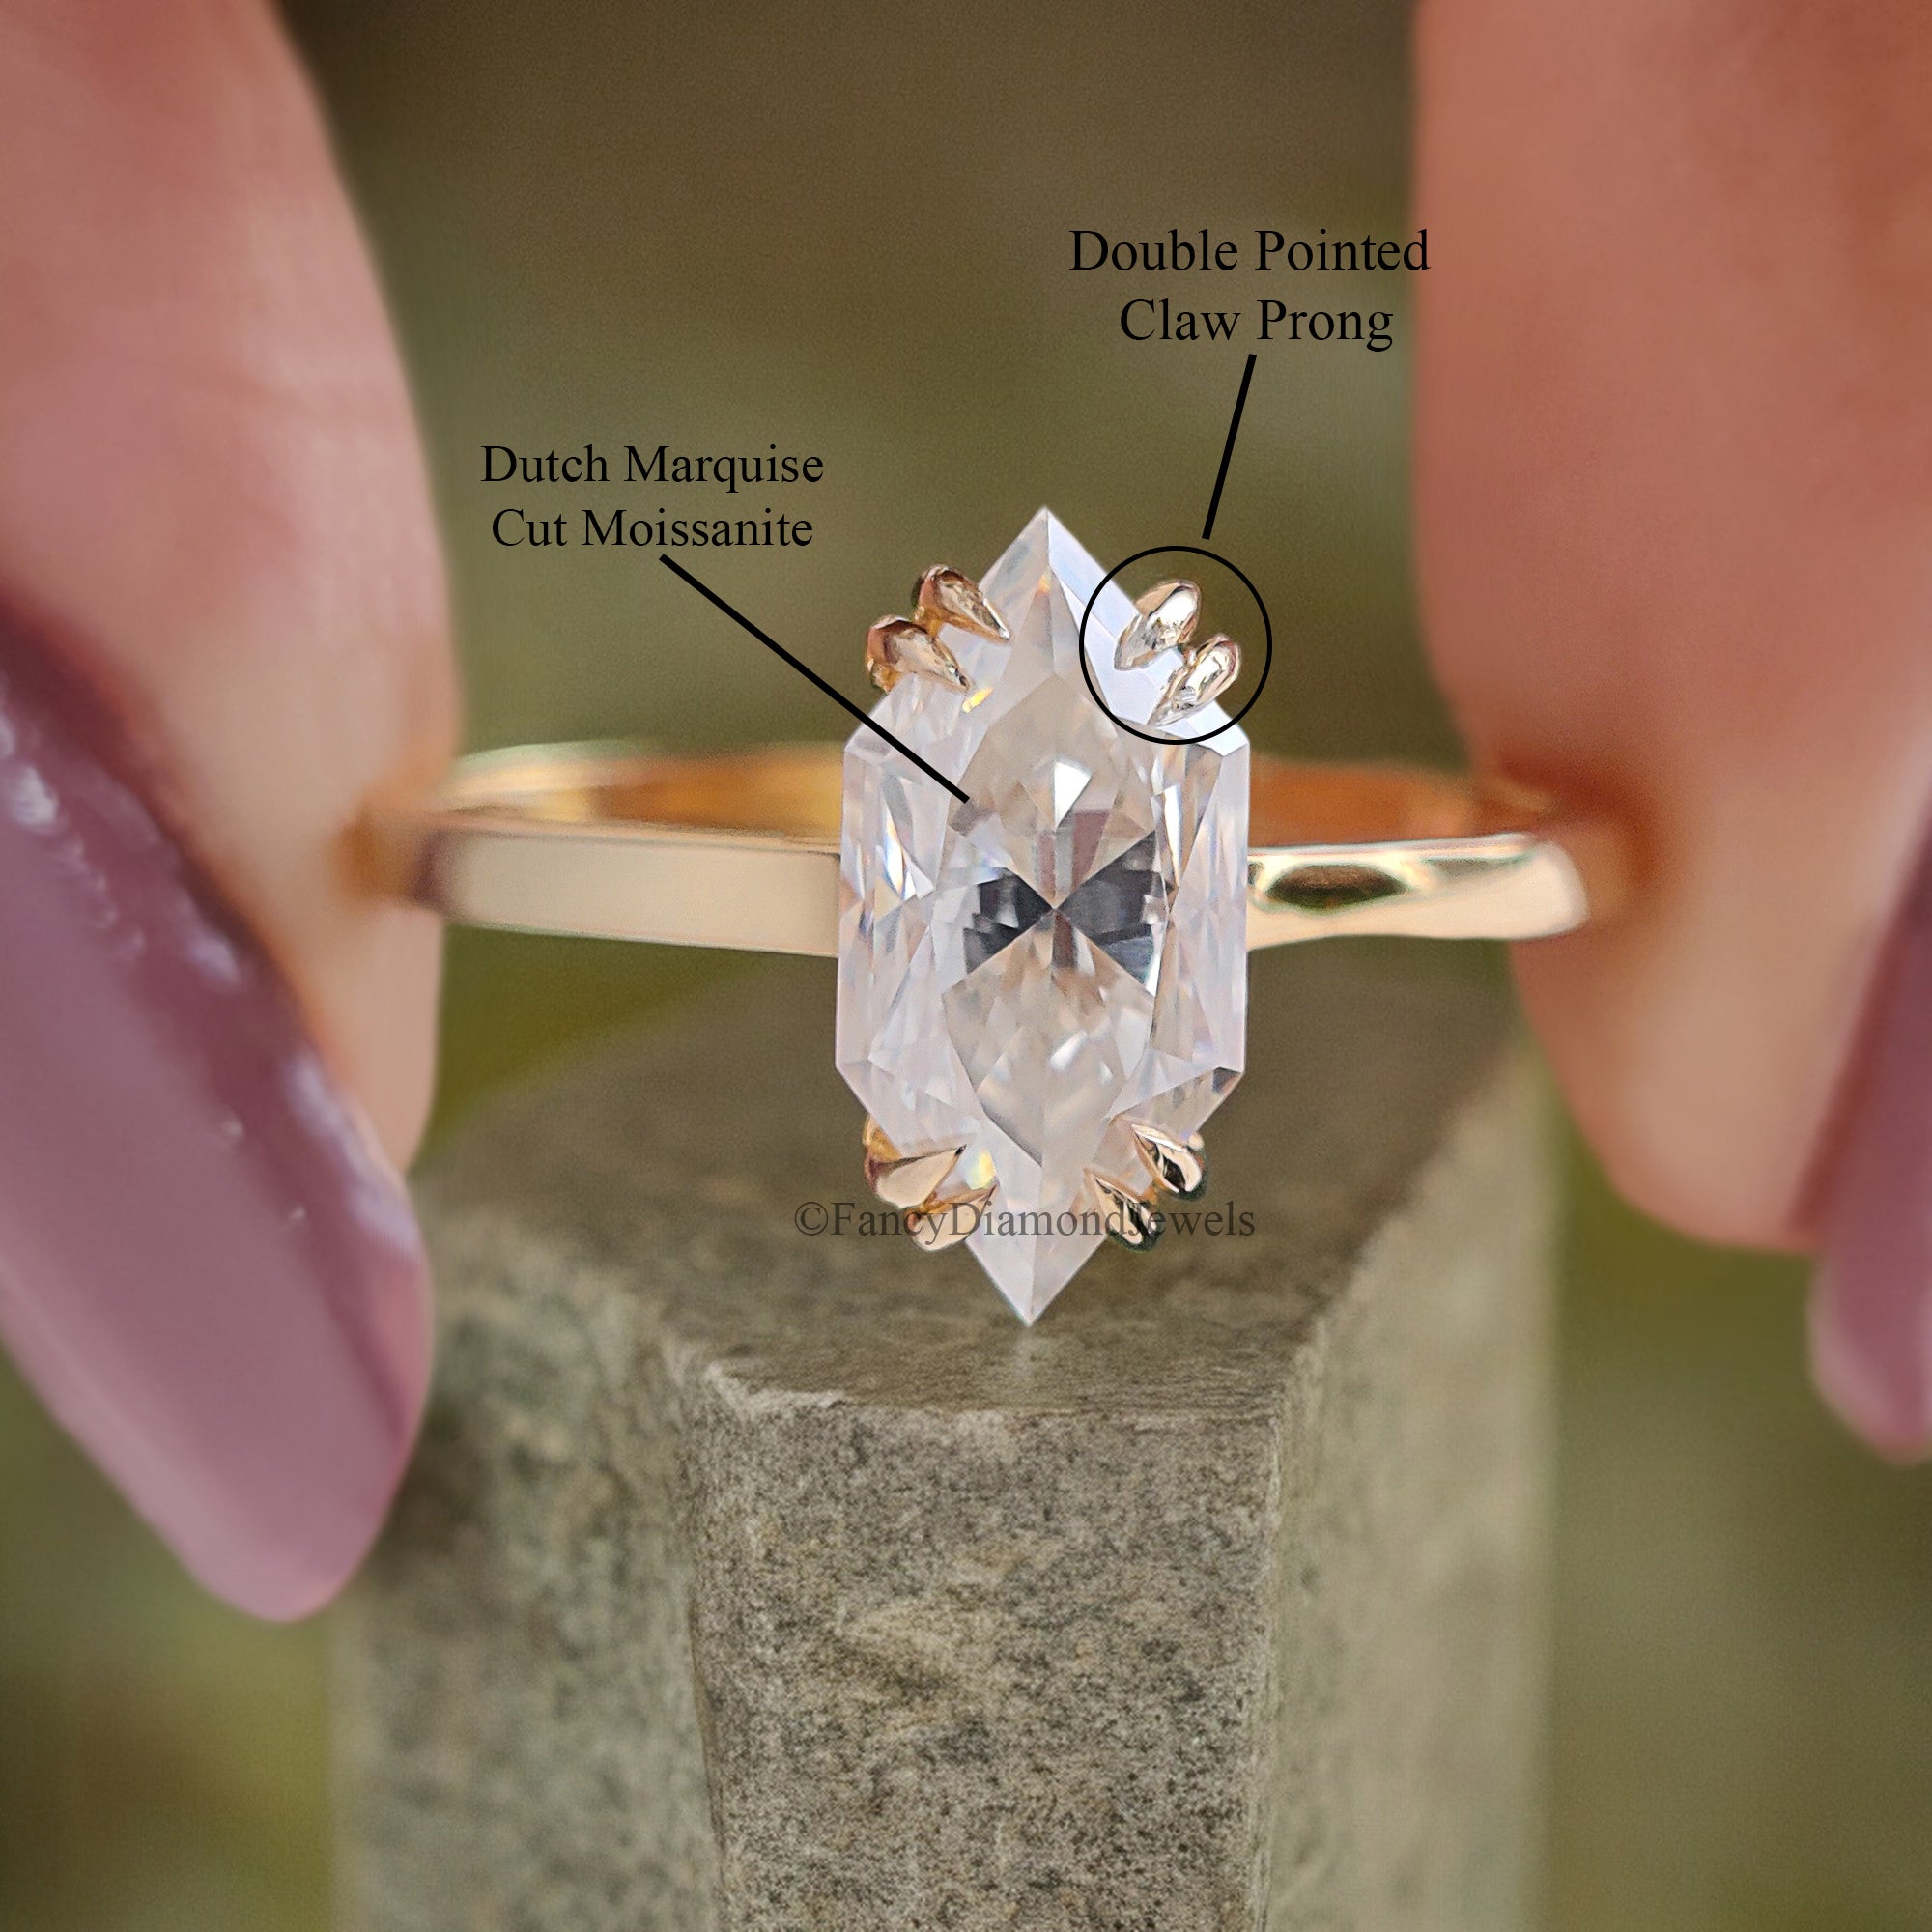 1.20 CT Dutch Marquise Engagement Ring Colorless Moissanite Ring Pointed Claw Wedding Ring Antique Marquise Handmade Ring Gift For Her FD196